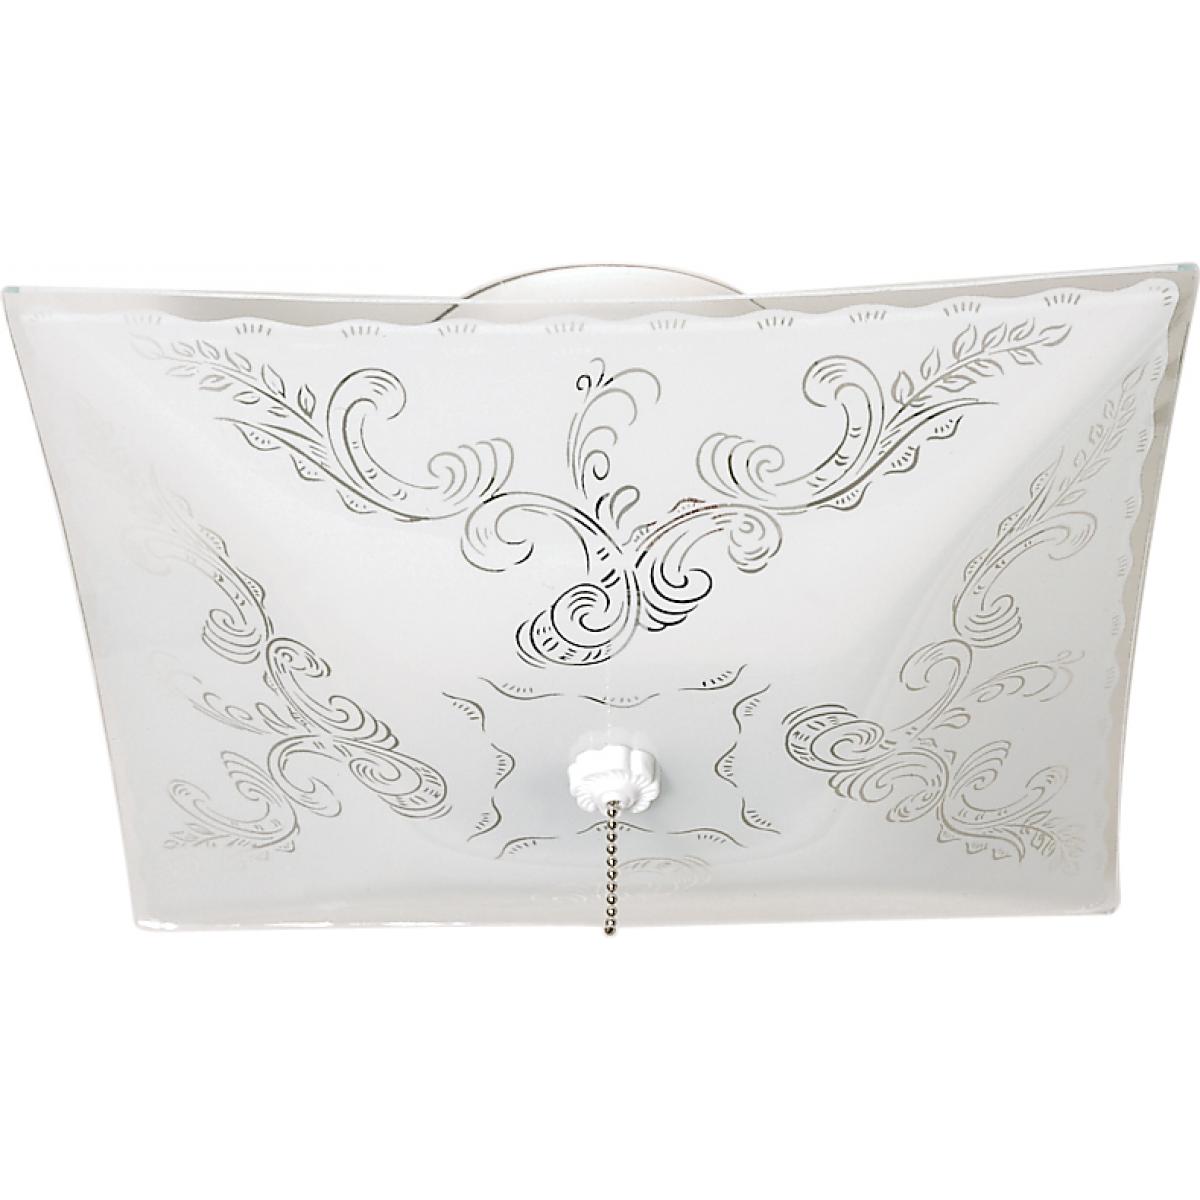 Satco 77-392 2 Light - 12" - Ceiling Fixture - Square Floral / with Pull Chain - White Finish